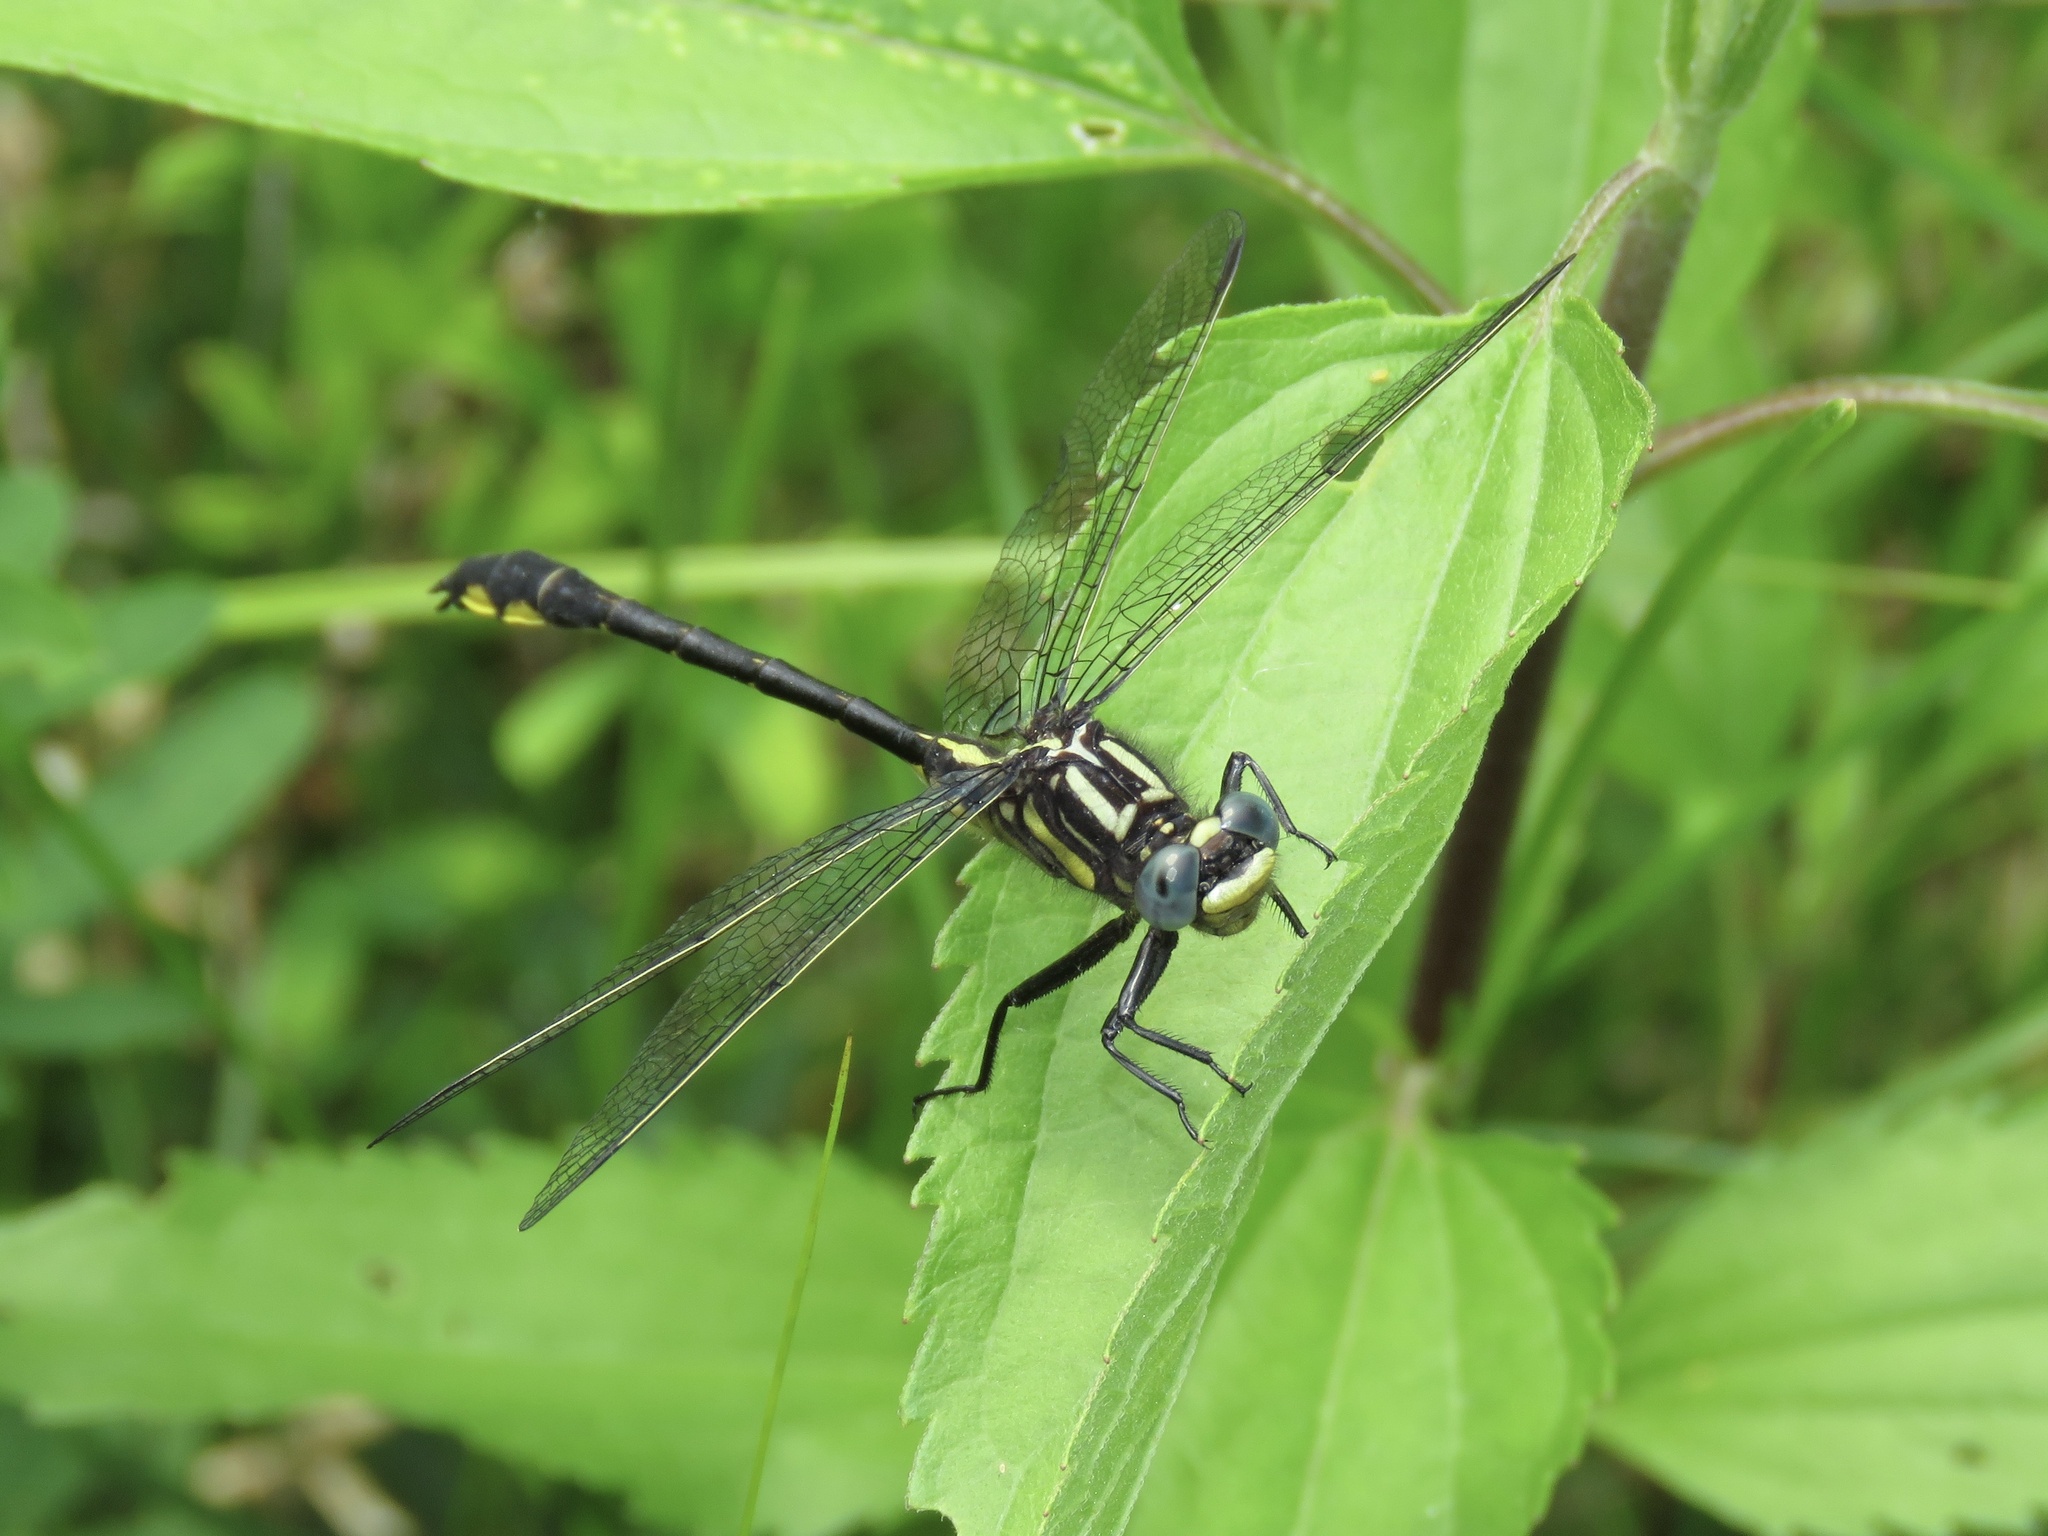 Ontario endangered species: a rapids clubtail dragonfly sitting on a leaf